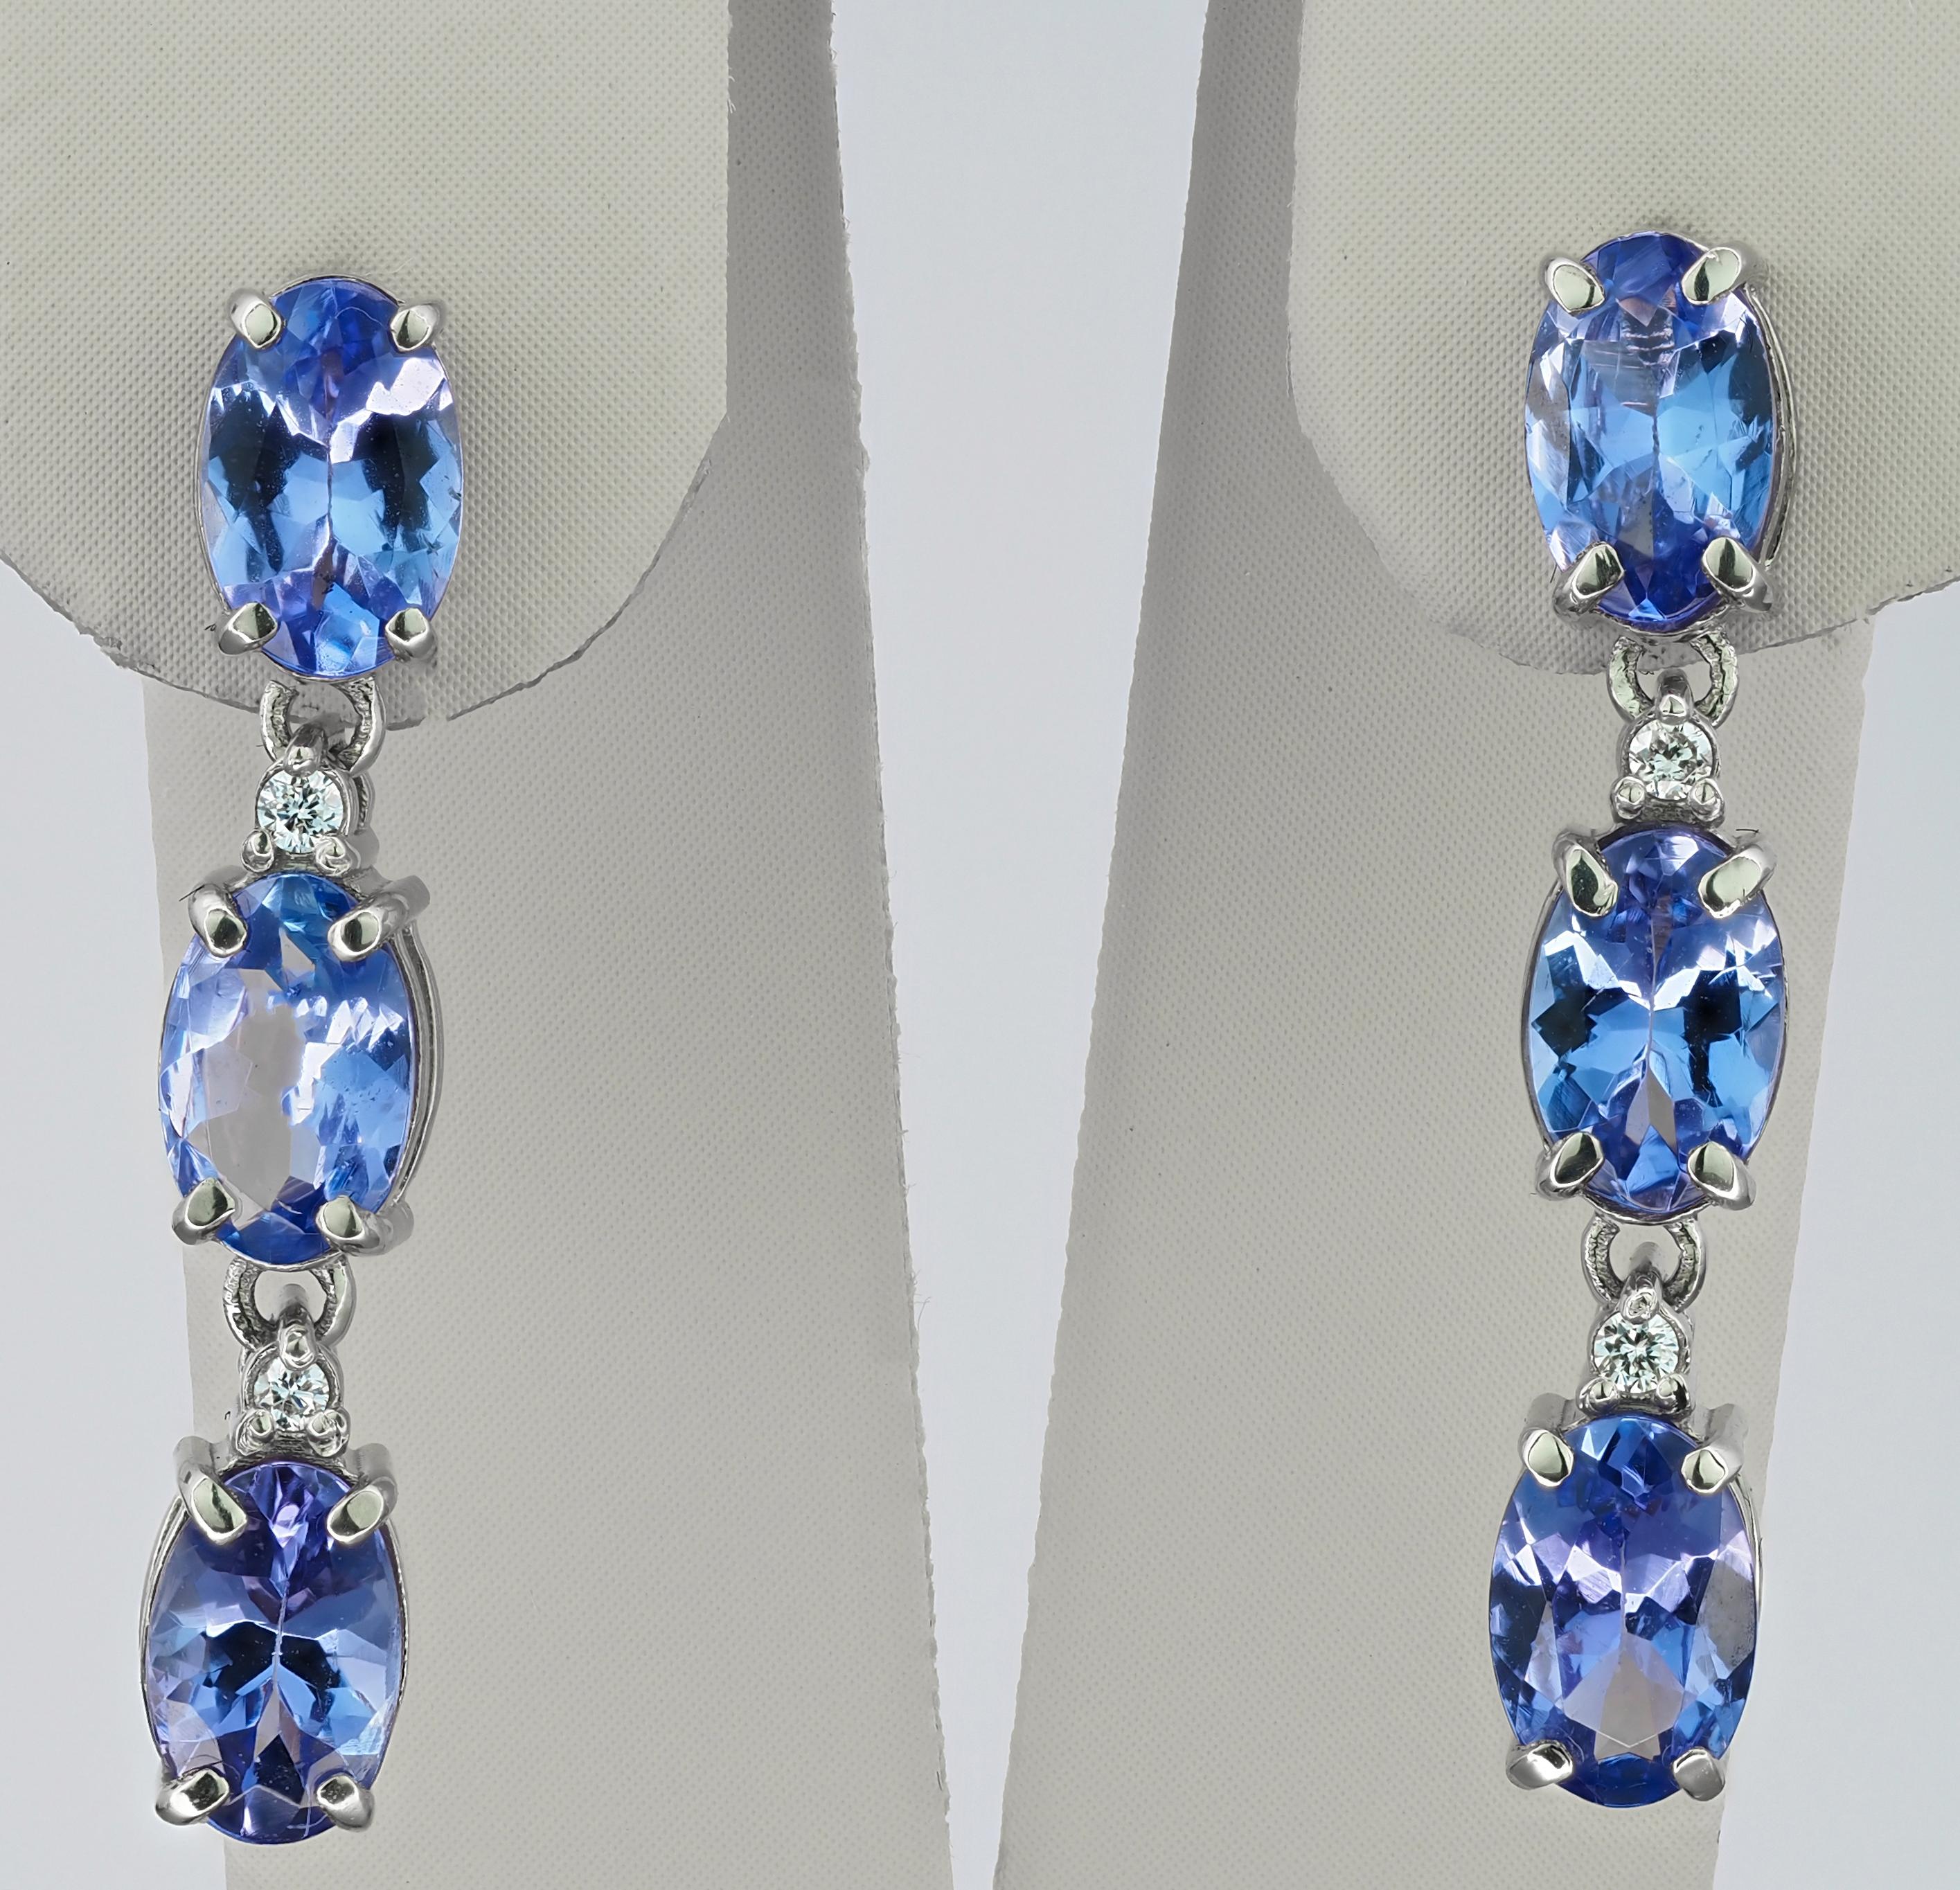  Tanzanite 14k gold earrings.

Weight: 2.5 g.
Size: 23 x 4.5 mm.

Gemstones: Natural tanzanites - 6 pieces
Weight: approx 4.00 ct in total, oval cut, color - blue light
Clarity: Transparent with inclusions
Surrounding stones:
Diamonds: weight - 0.08